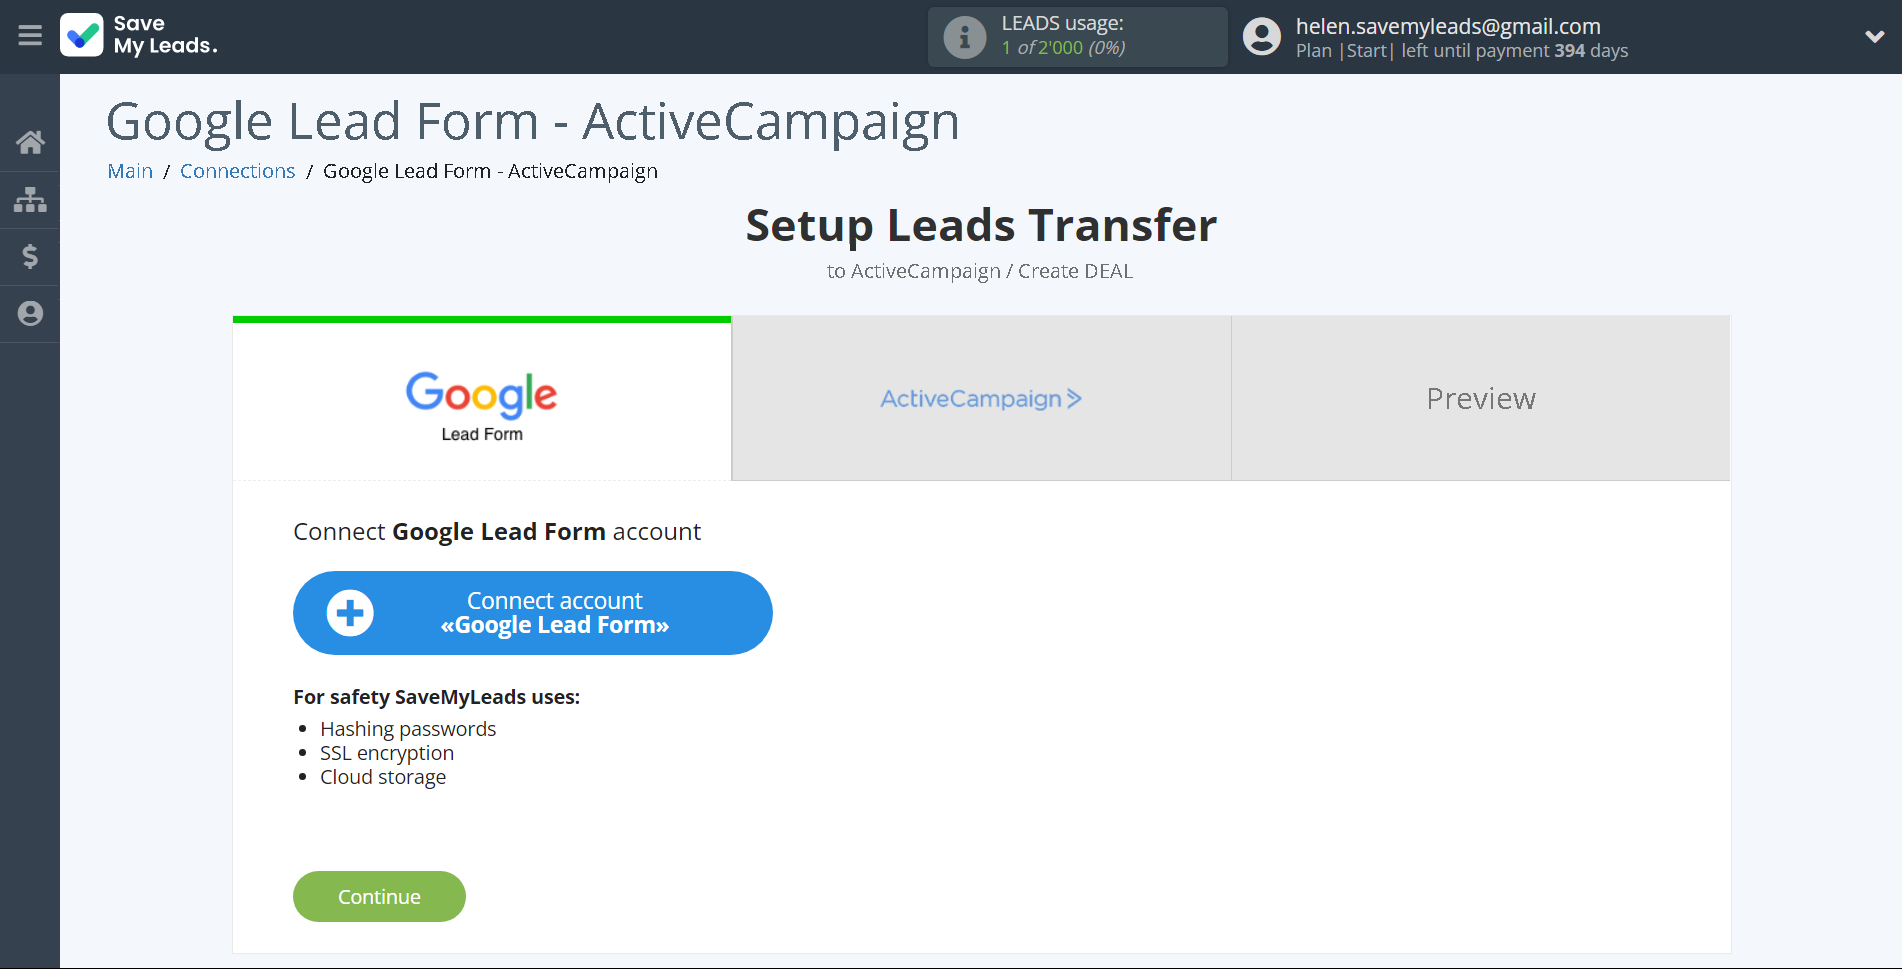 How to Connect Google Lead Form with ActiveCampaign Create Deal | Data Source account